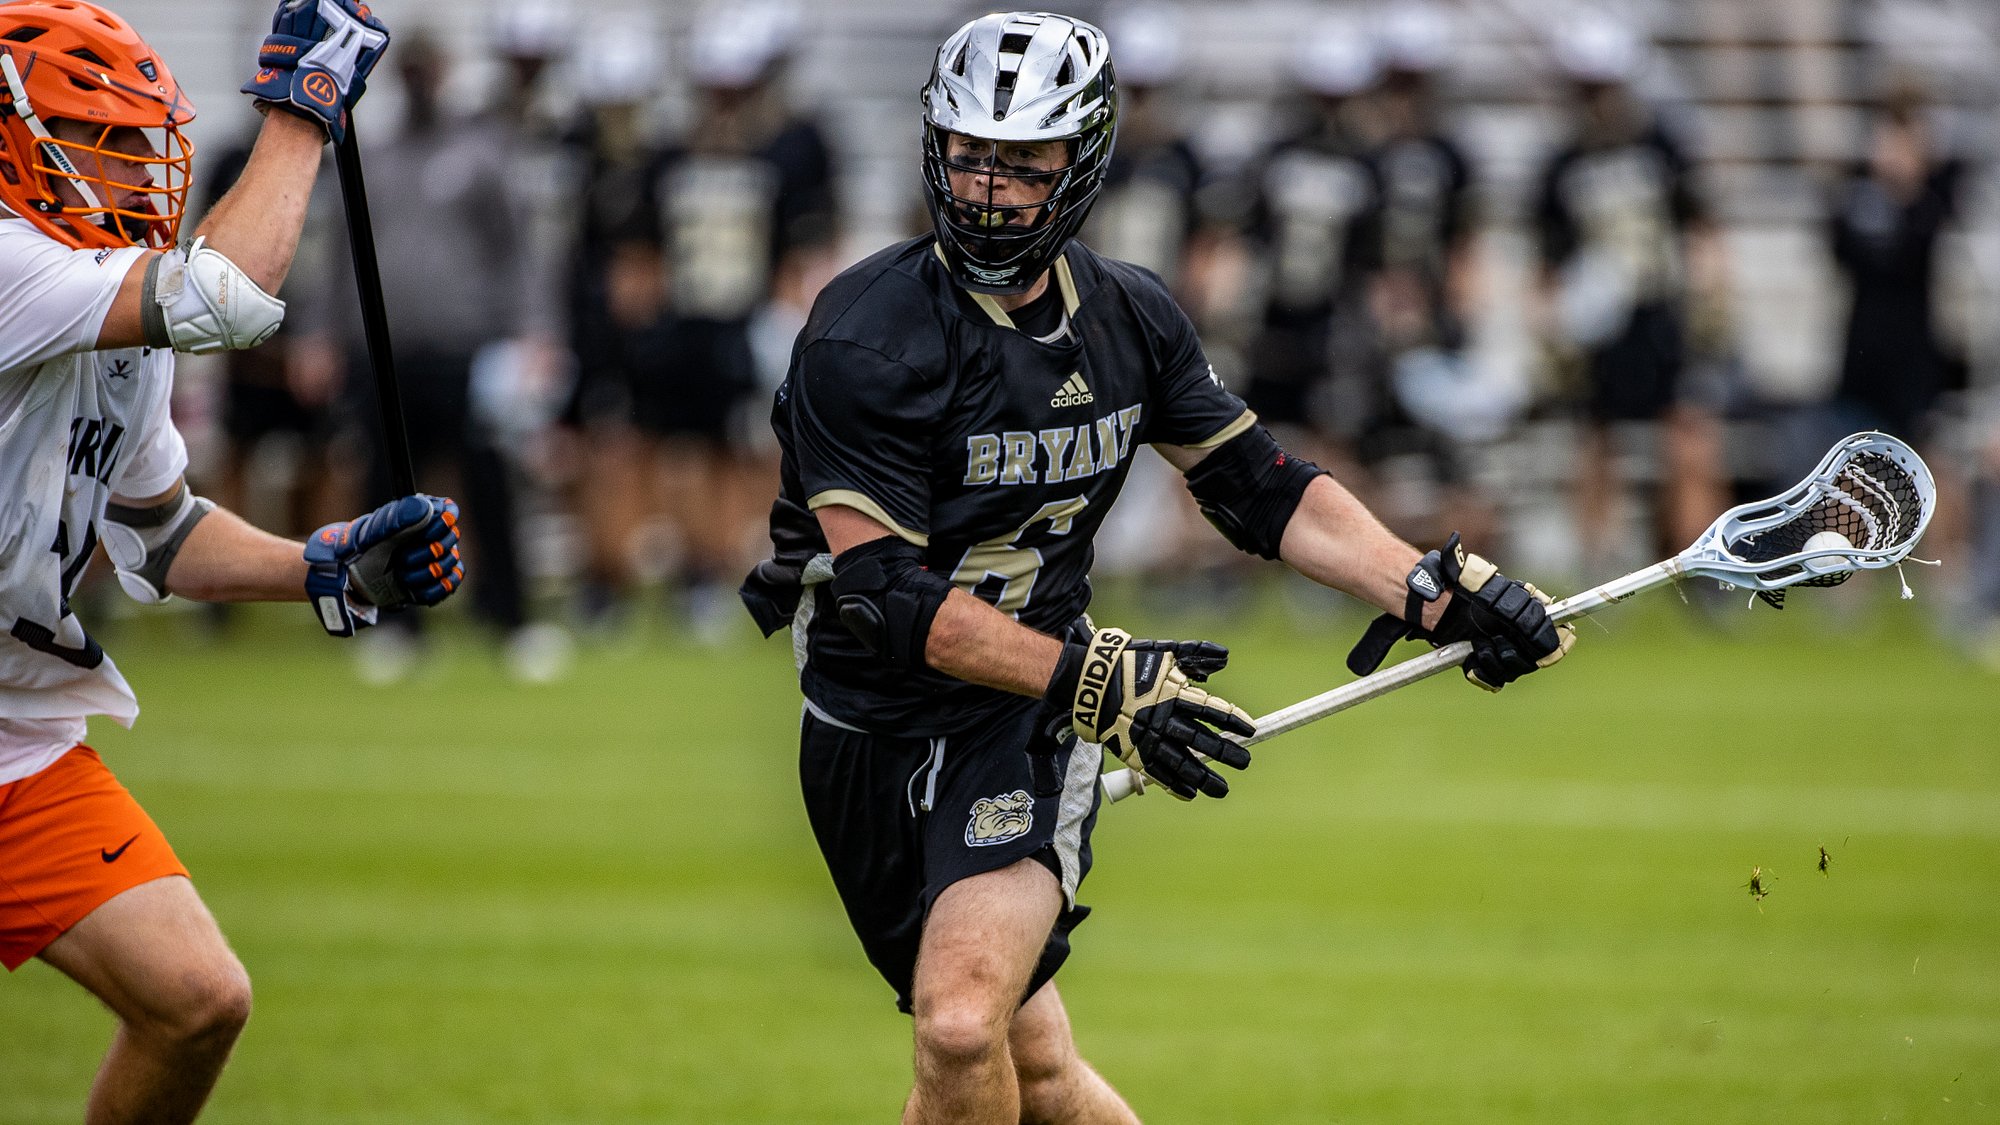 O'Rourke named Preseason Honorable Mention All-American by Inside Lacrosse